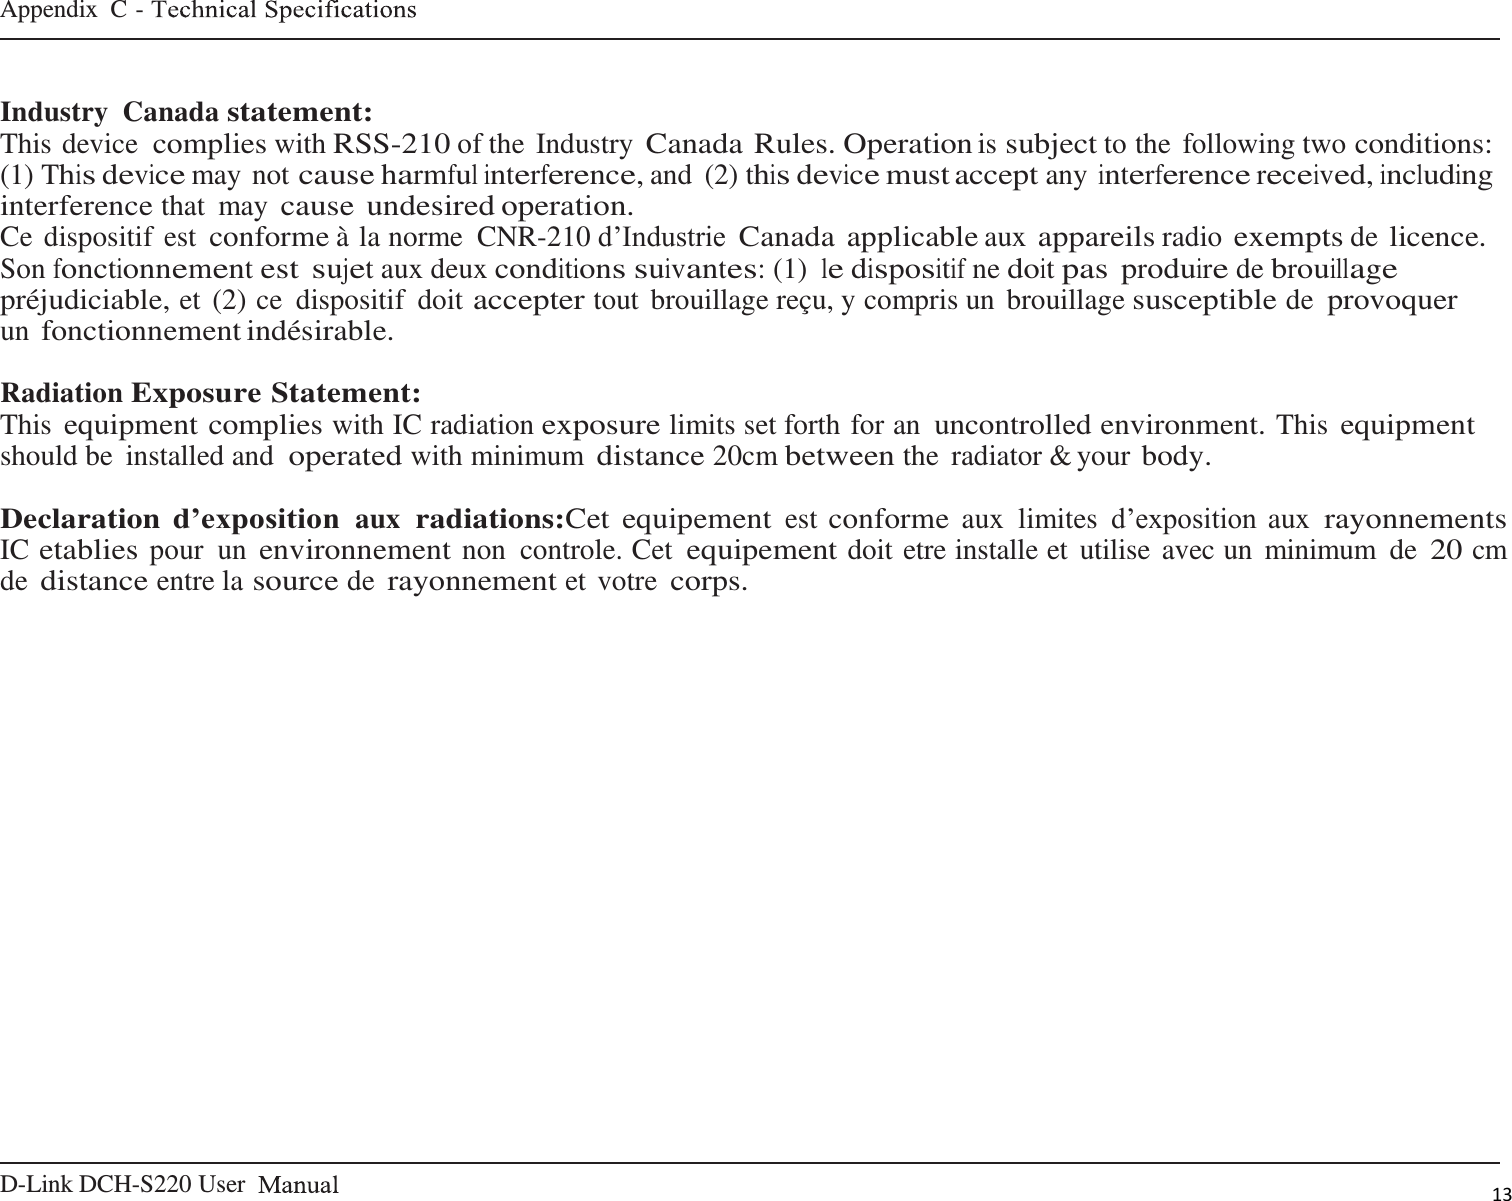 D-Link DCH-S220 User   Appendix  C -    13    Industry  Canada statement: This device complies with RSS-210 of the Industry Canada Rules. Operation is subject to the  following two conditions: (1) This device may not cause harmful interference, and  (2) this device must accept any interference received, including interference that  may cause undesired operation. Ce dispositif est conforme à la norme  CNR-210 d’Industrie Canada applicable aux appareils radio exempts de licence. Son fonctionnement est sujet aux deux conditions suivantes: (1) le dispositif ne doit pas produire de brouillage préjudiciable, et  (2) ce  dispositif  doit accepter tout  brouillage reçu, y compris un  brouillage susceptible de provoquer un fonctionnement indésirable.  Radiation Exposure Statement: This equipment complies with IC radiation exposure limits set forth for an uncontrolled environment. This equipment should be  installed and operated with minimum distance 20cm between the  radiator &amp; your body.  Declaration d’exposition aux radiations:Cet equipement est conforme aux  limites  d’exposition aux rayonnements IC etablies pour un environnement non  controle. Cet equipement doit etre installe et utilise avec un  minimum  de 20 cm de distance entre la source de rayonnement et votre corps. 